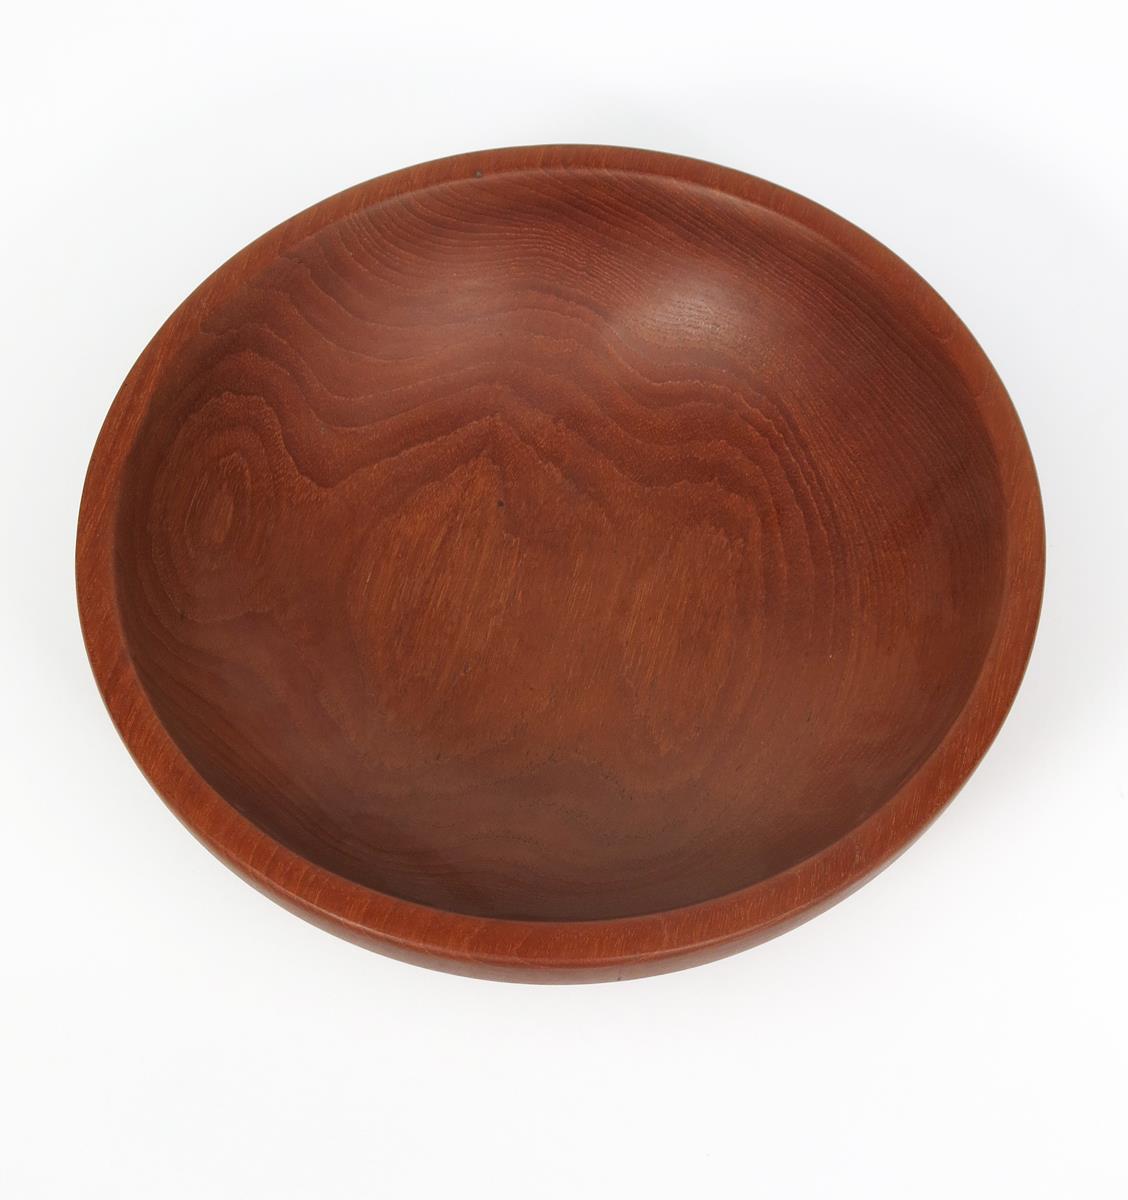 ‡ An Alan Peters Furniture mahogany bowl designed by Alan Peters OBE, circular section on shallow - Image 2 of 3